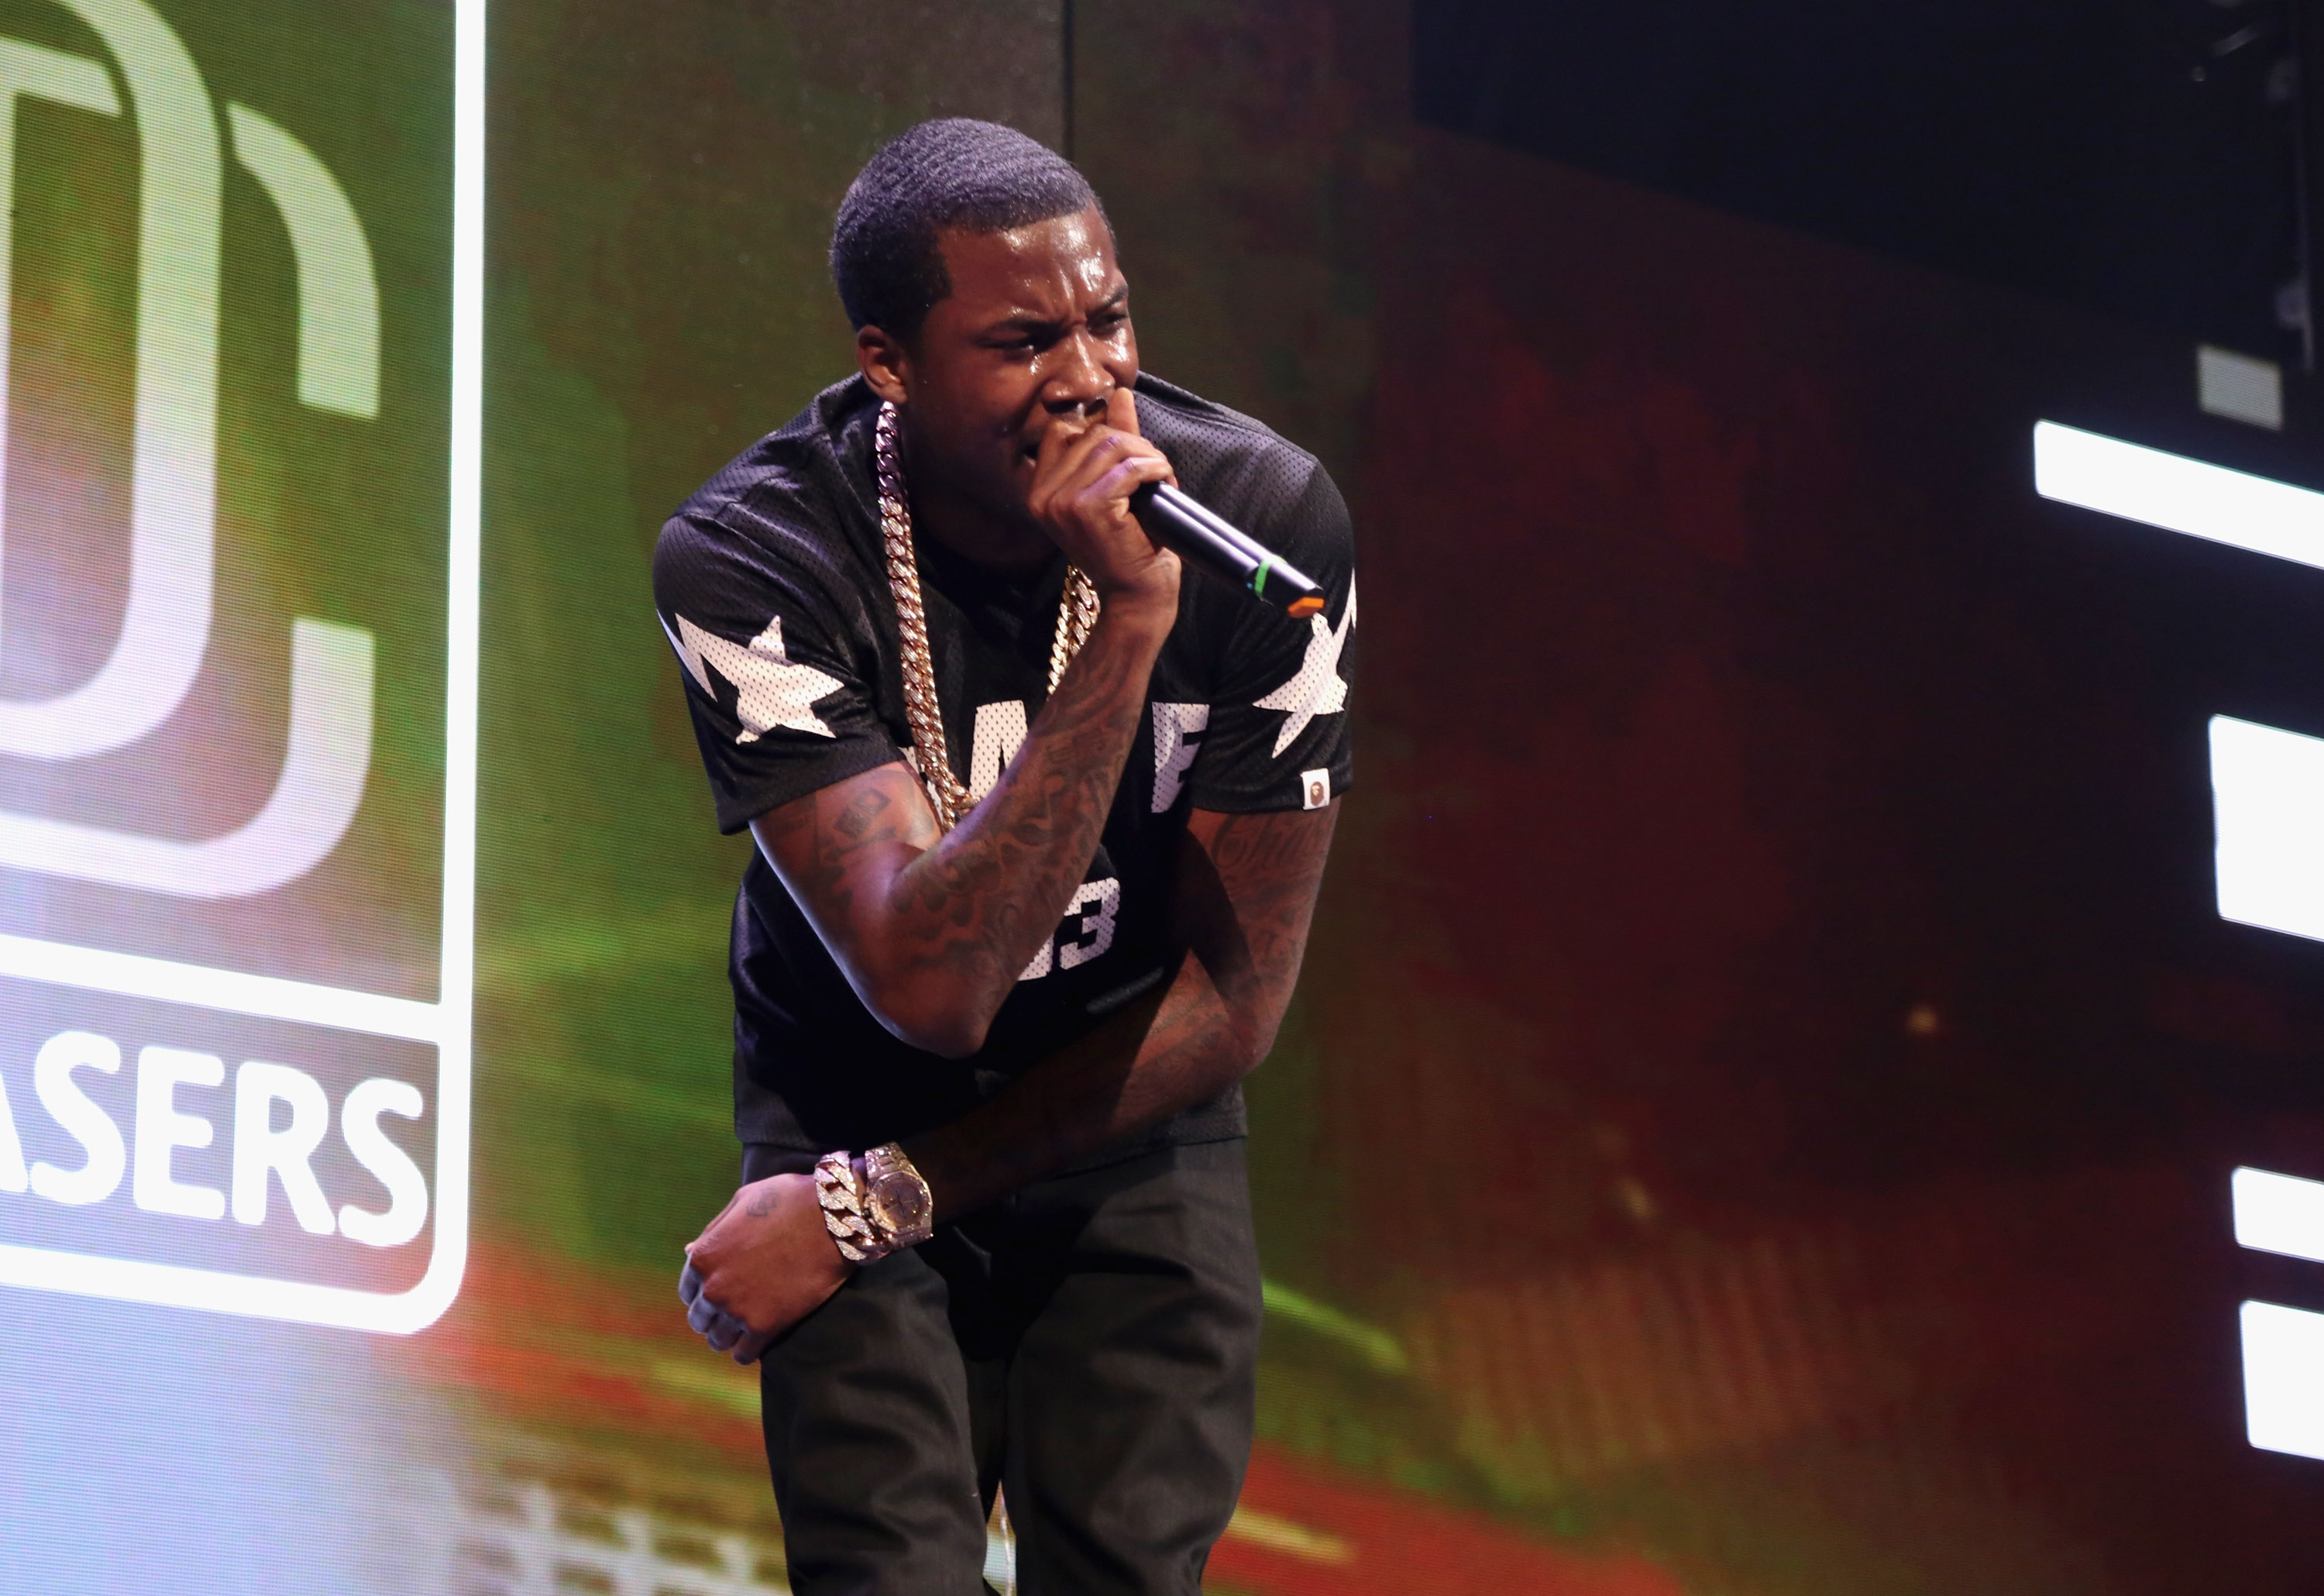 Meek Mill to Perform at Roc Nation's NFL Kickoff Concert